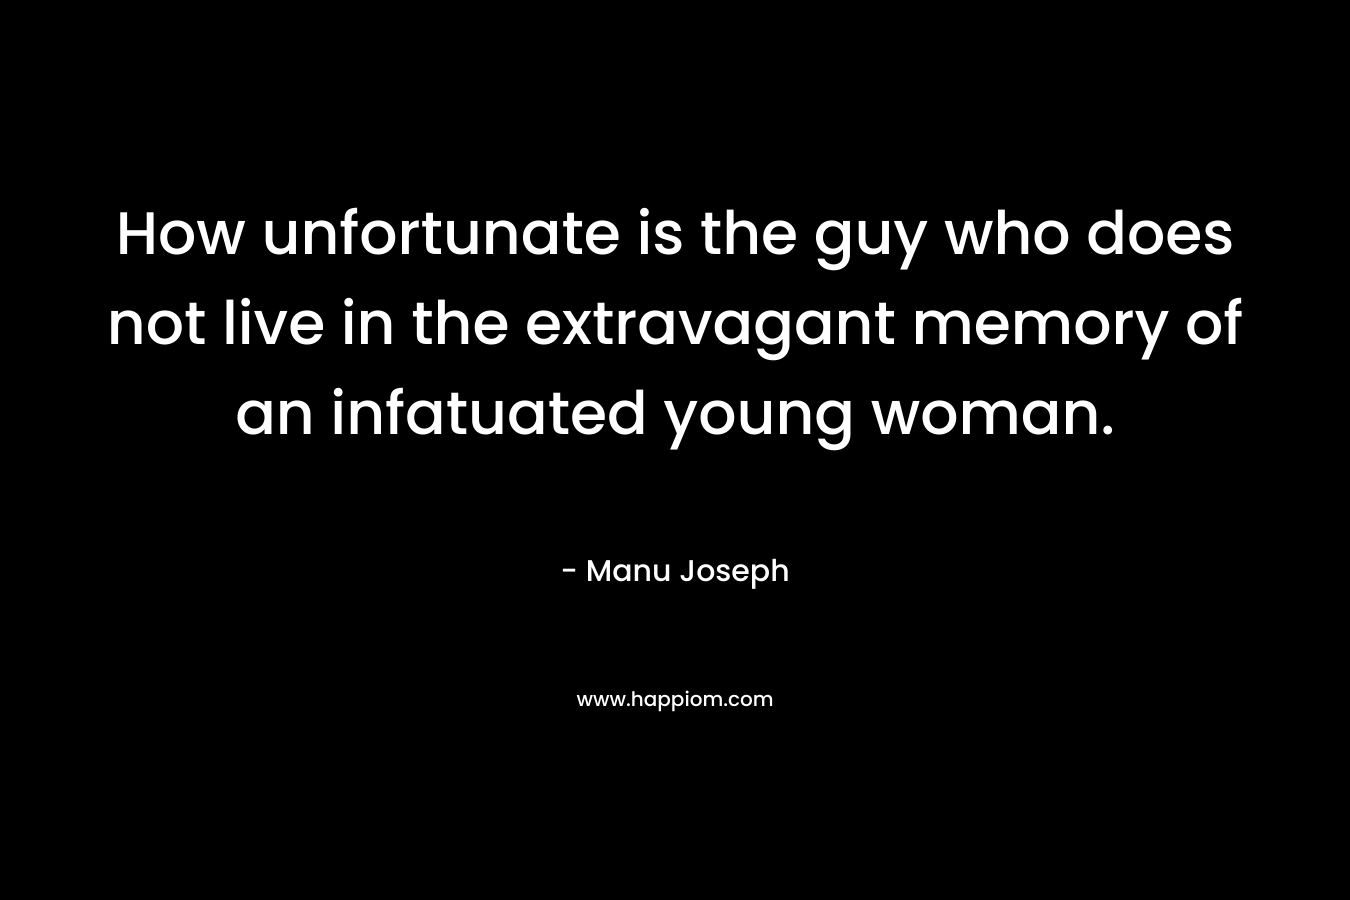 How unfortunate is the guy who does not live in the extravagant memory of an infatuated young woman. – Manu Joseph